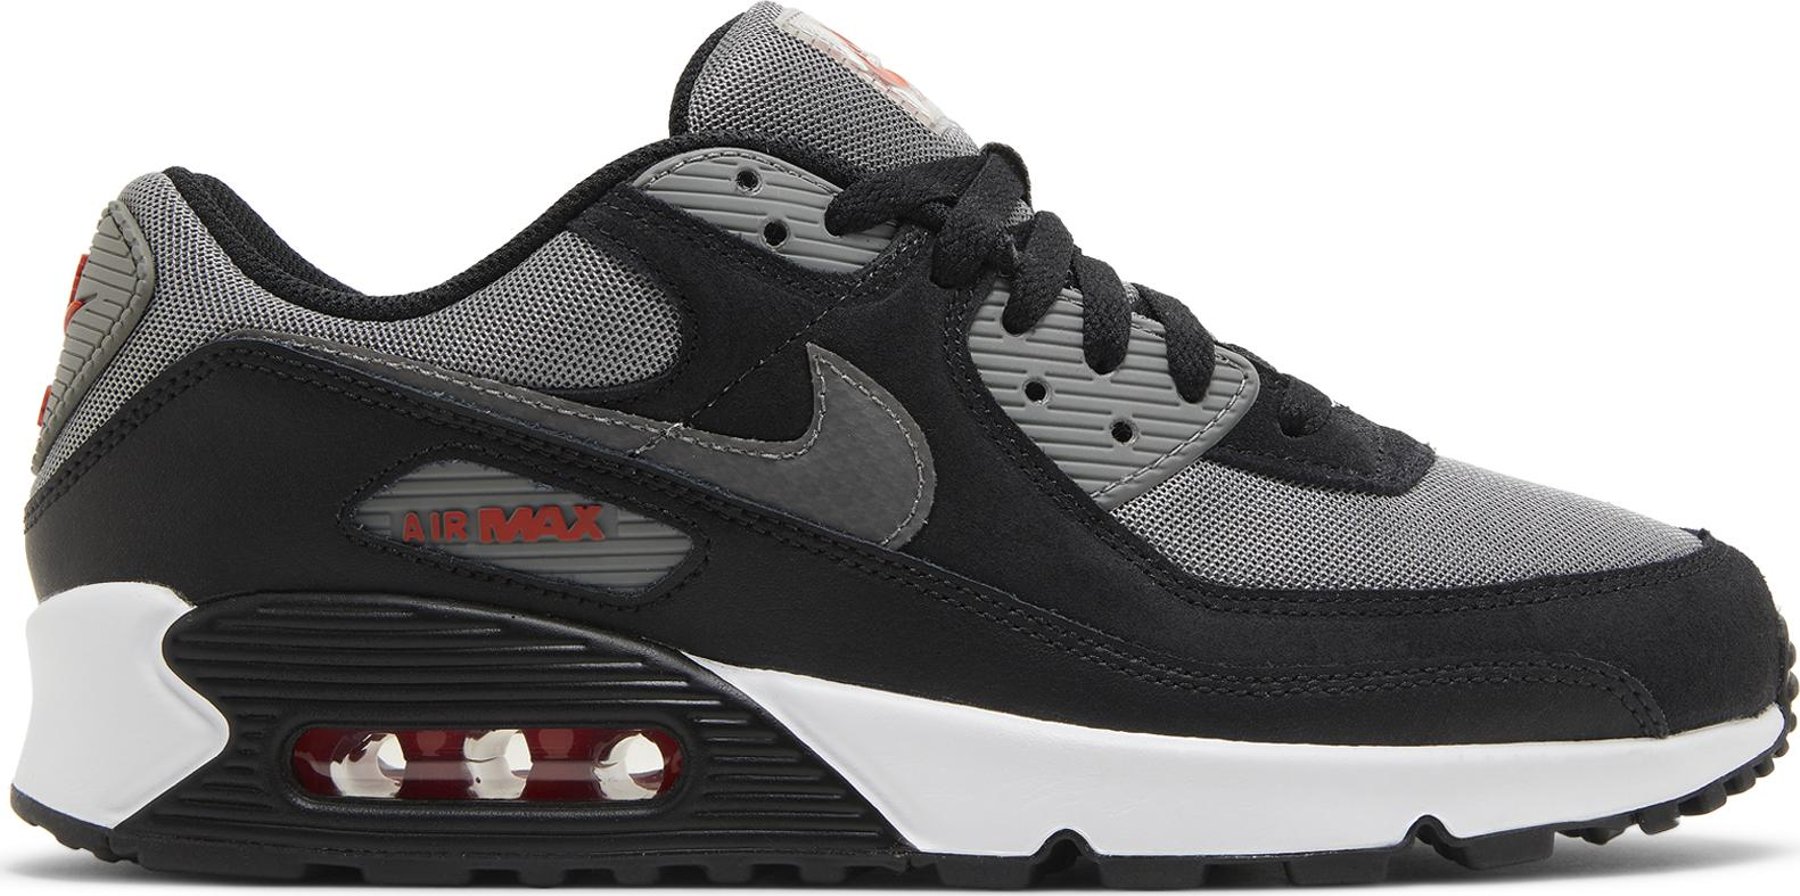 Buy Air Max 90 'Black Pewter Red' - FD0664 001 | GOAT